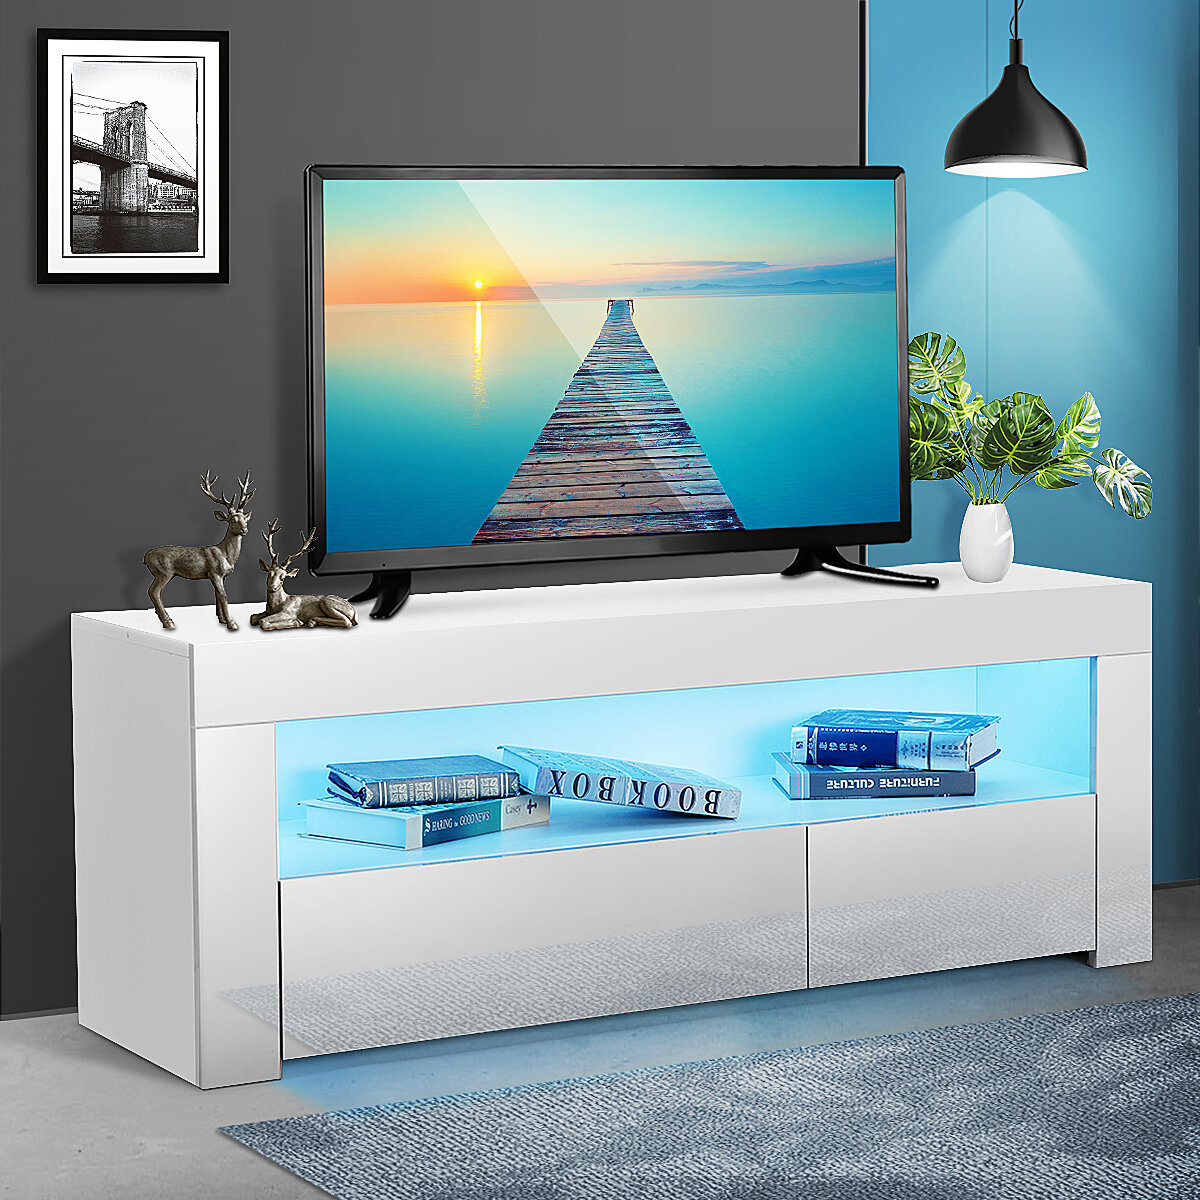 Woodyhome 47" High Gloss TV Stand with LED Lights High Storage Space TV Console HolderEasy to Install for Home Bedroom